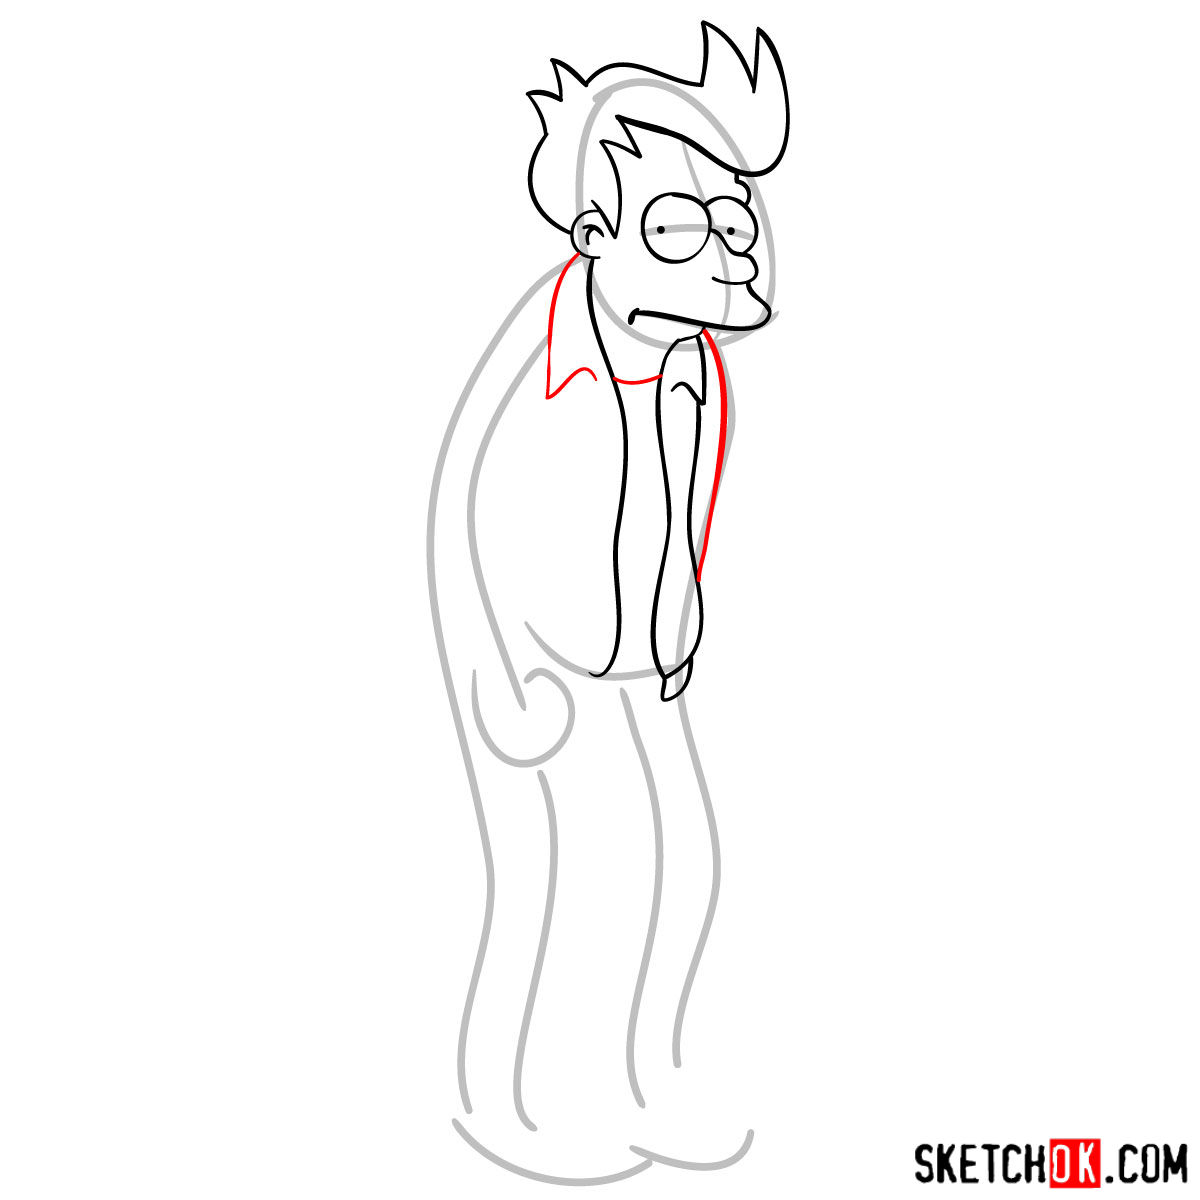 How to draw Philip J. Fry step by step - step 05